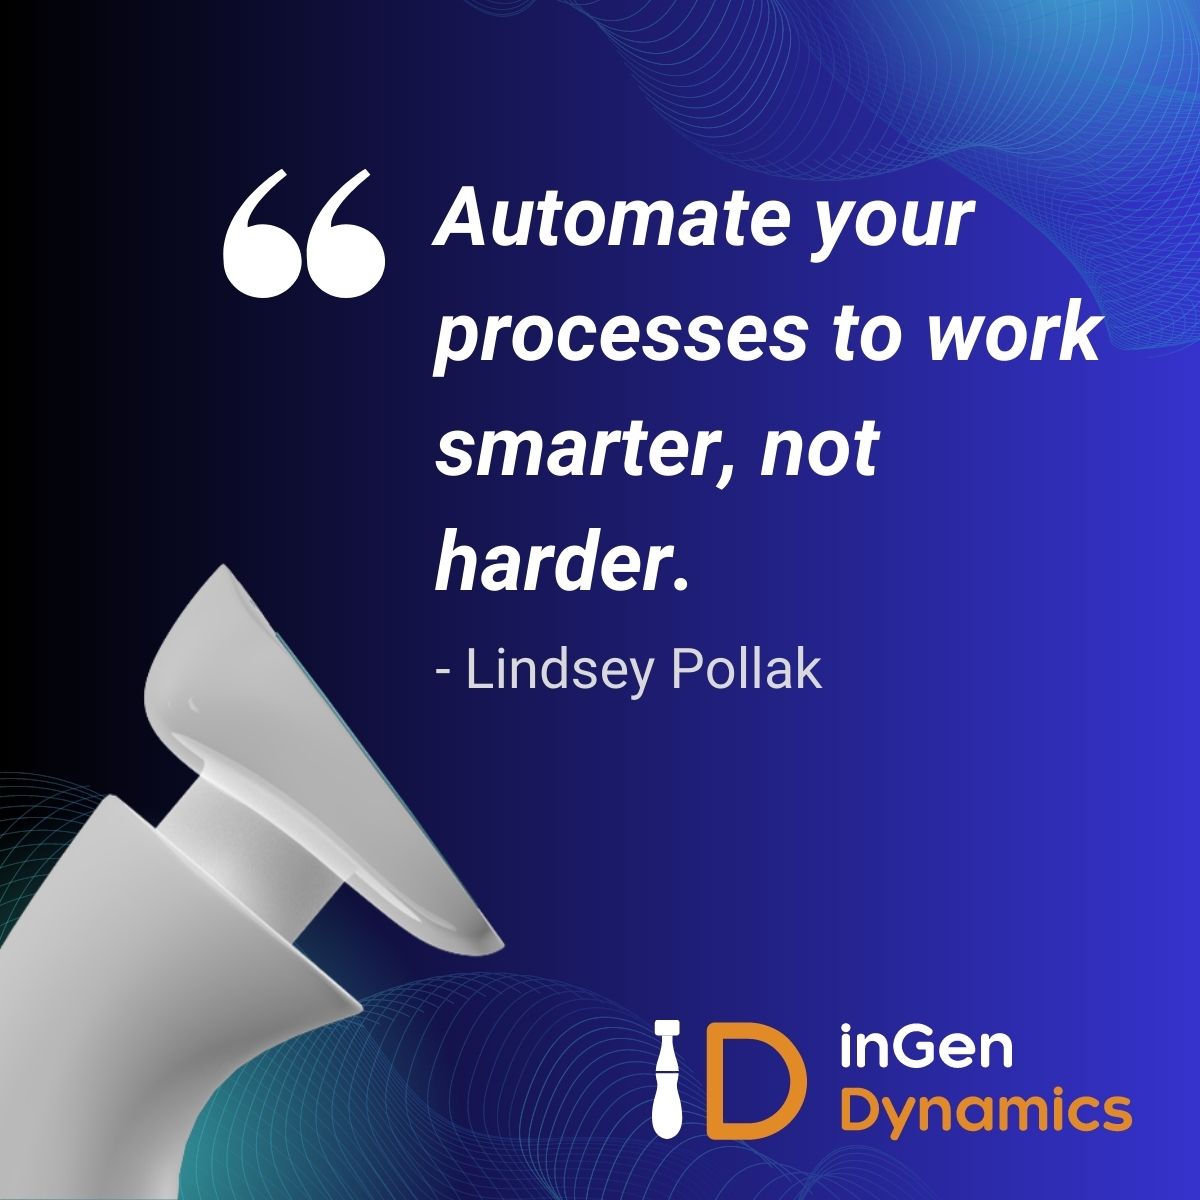 Using technology to handle repetitive tasks can free up valuable time and resources to focus on growth and innovation. 

Take your business to the next level with automation. 

#AI #Robotics #SmartAutomation #BuildingTheFuture #inGenDynamics